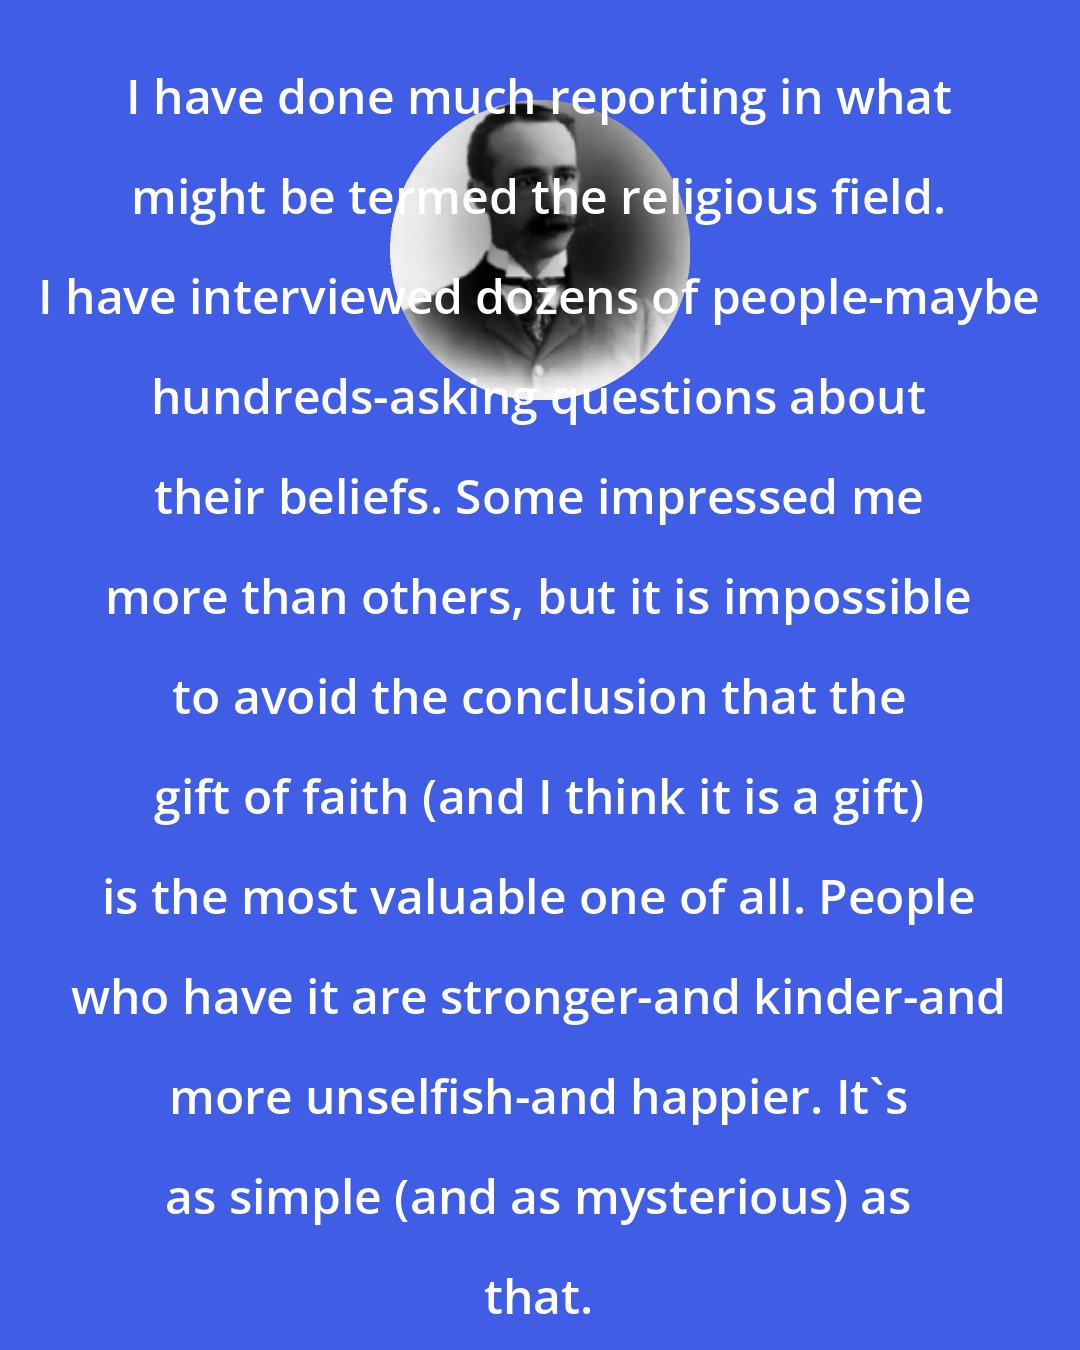 Arthur Gordon Webster: I have done much reporting in what might be termed the religious field. I have interviewed dozens of people-maybe hundreds-asking questions about their beliefs. Some impressed me more than others, but it is impossible to avoid the conclusion that the gift of faith (and I think it is a gift) is the most valuable one of all. People who have it are stronger-and kinder-and more unselfish-and happier. It's as simple (and as mysterious) as that.